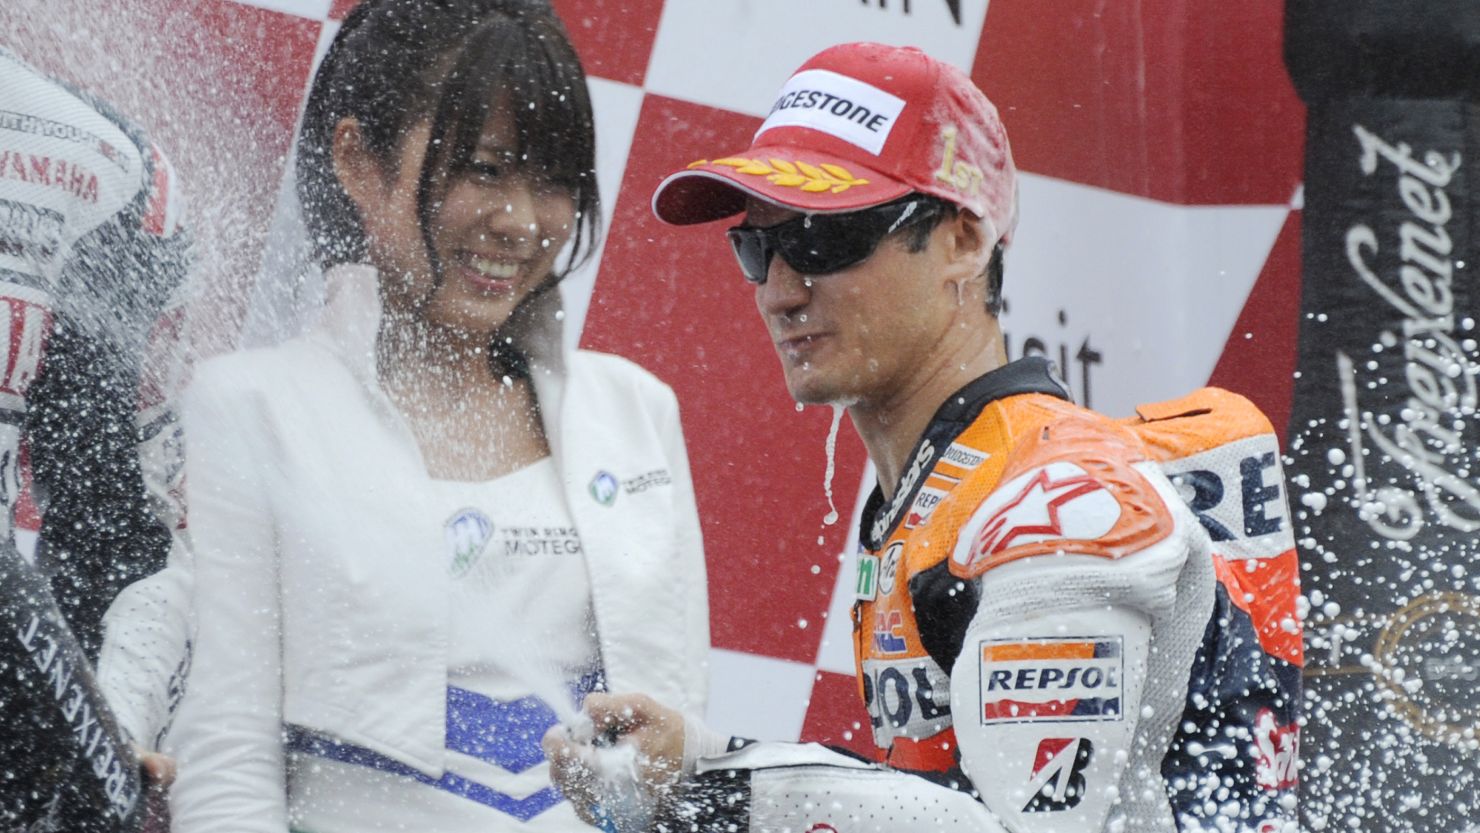 Dani Pedrosa celebrates his victory in the Japanese MotoGP in traditional style